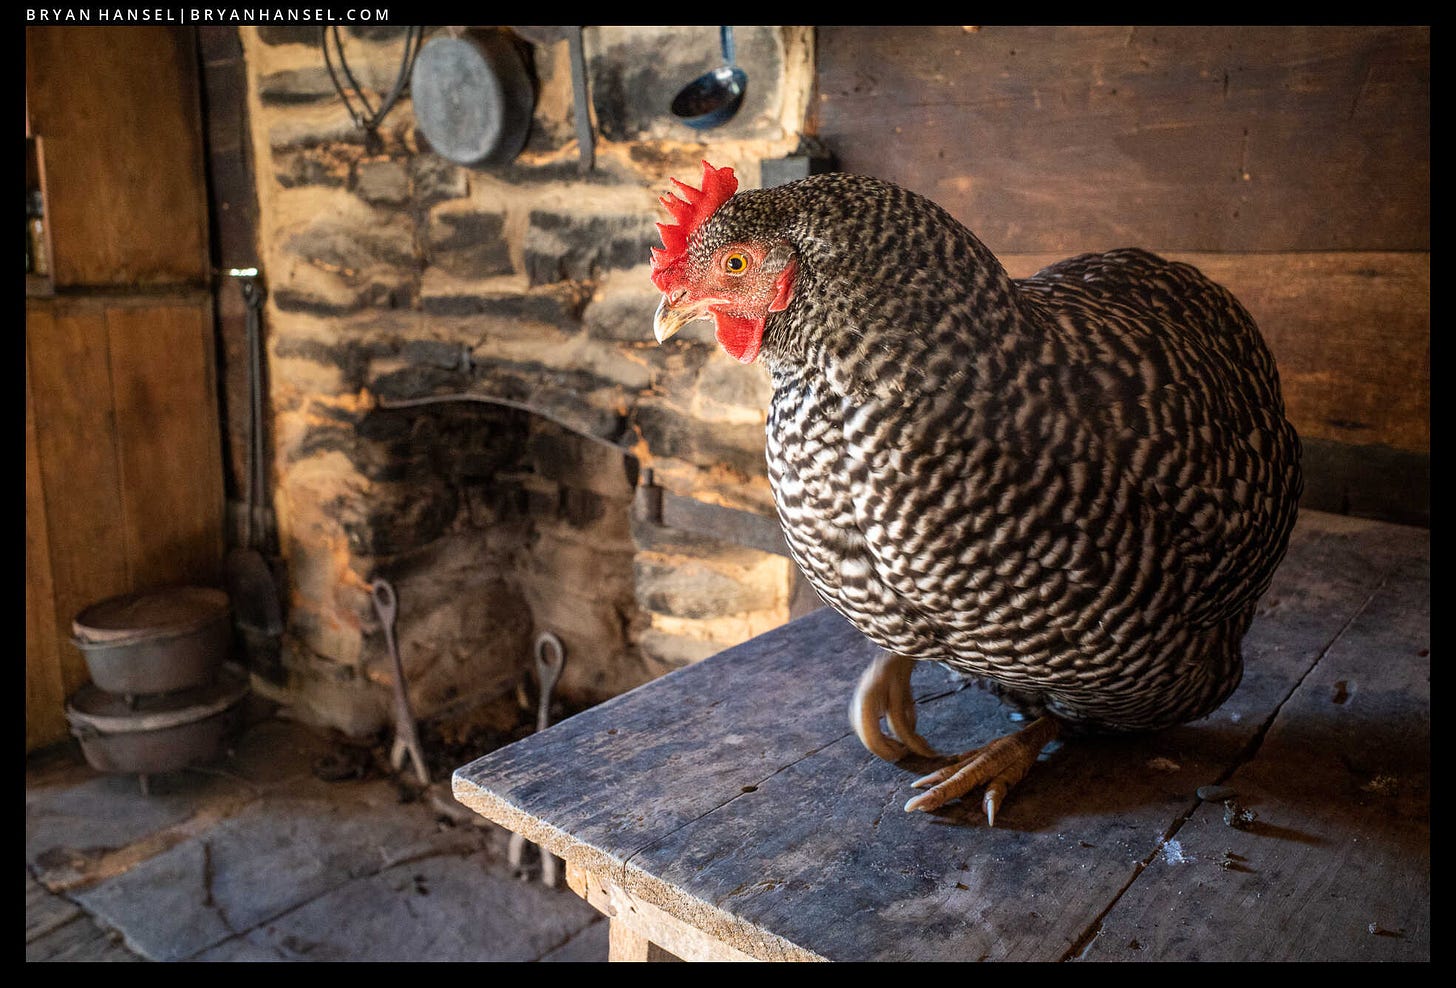 A chicken on a table in an old cabin with a fireplace and pots and pans in the background.